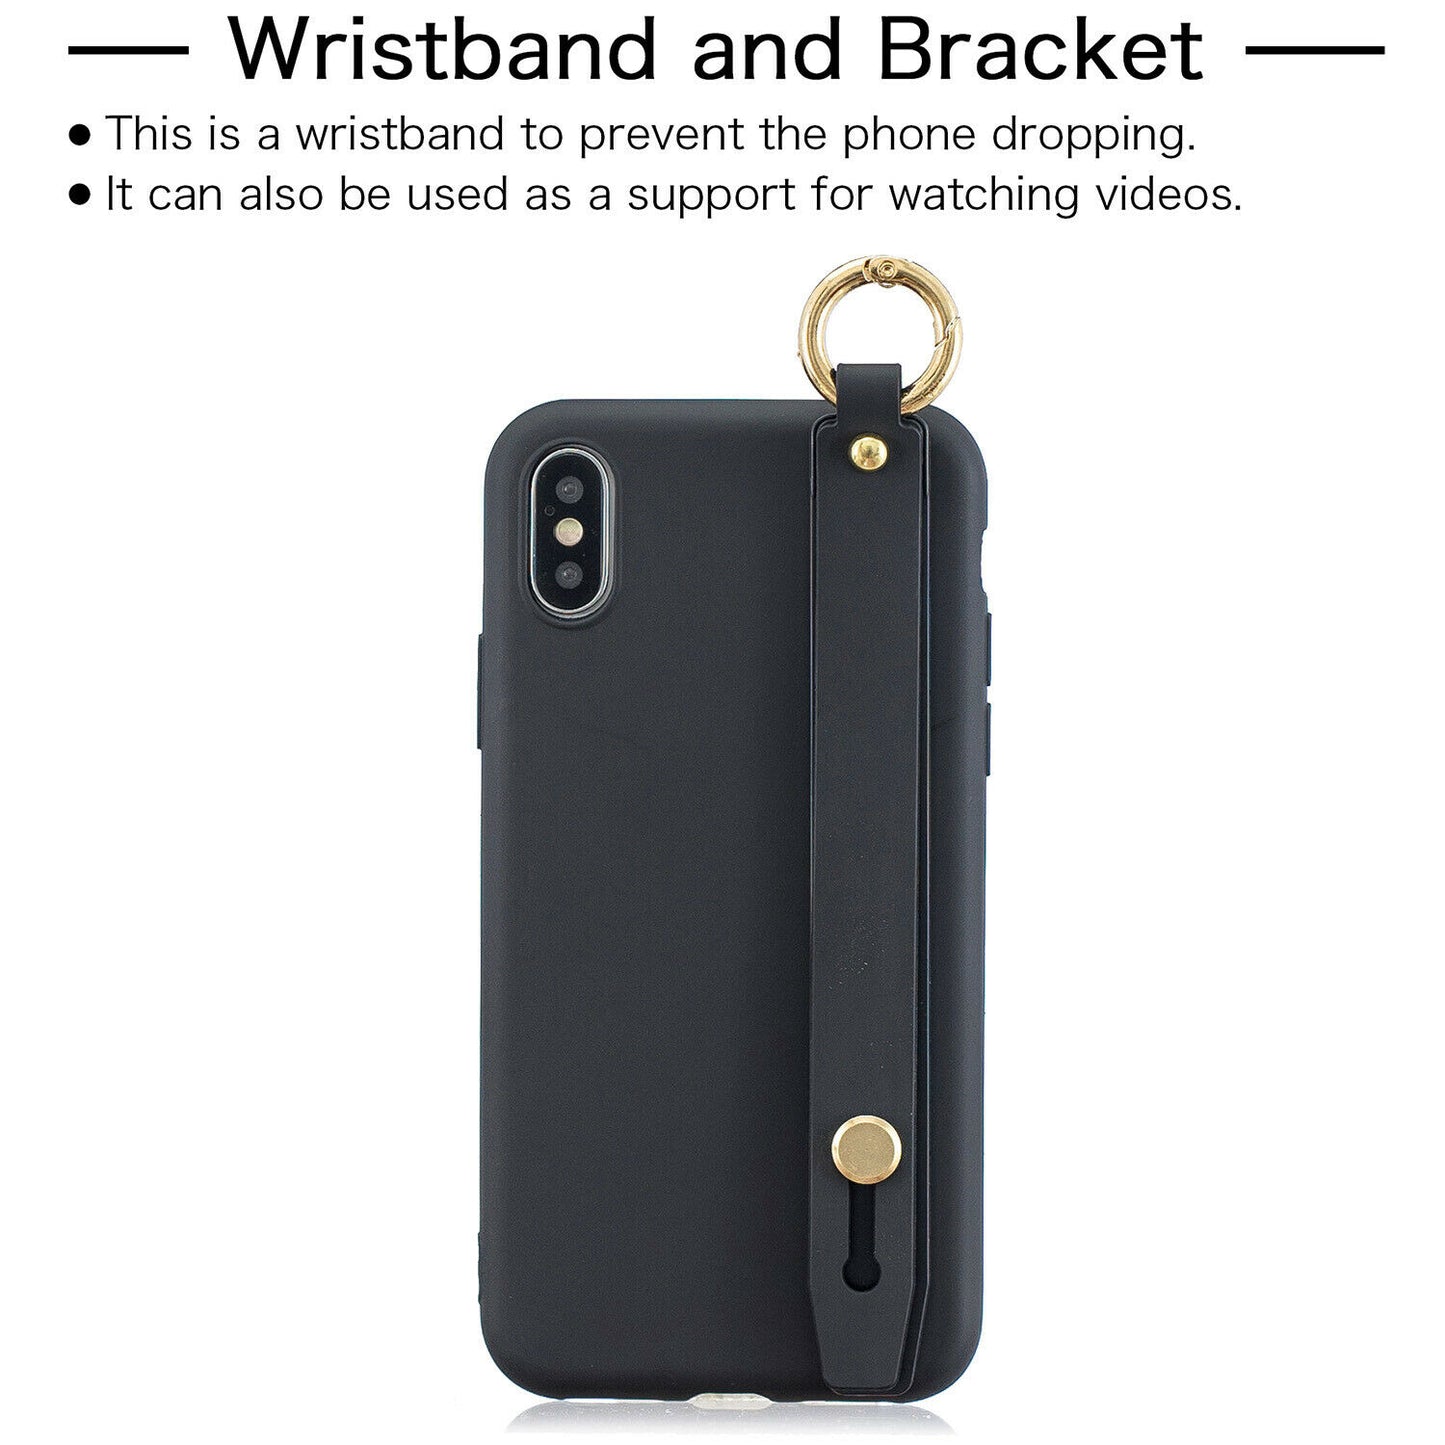 Cute Silicone Wrist Strap Protective Phone Case For iPhone - carolay.co